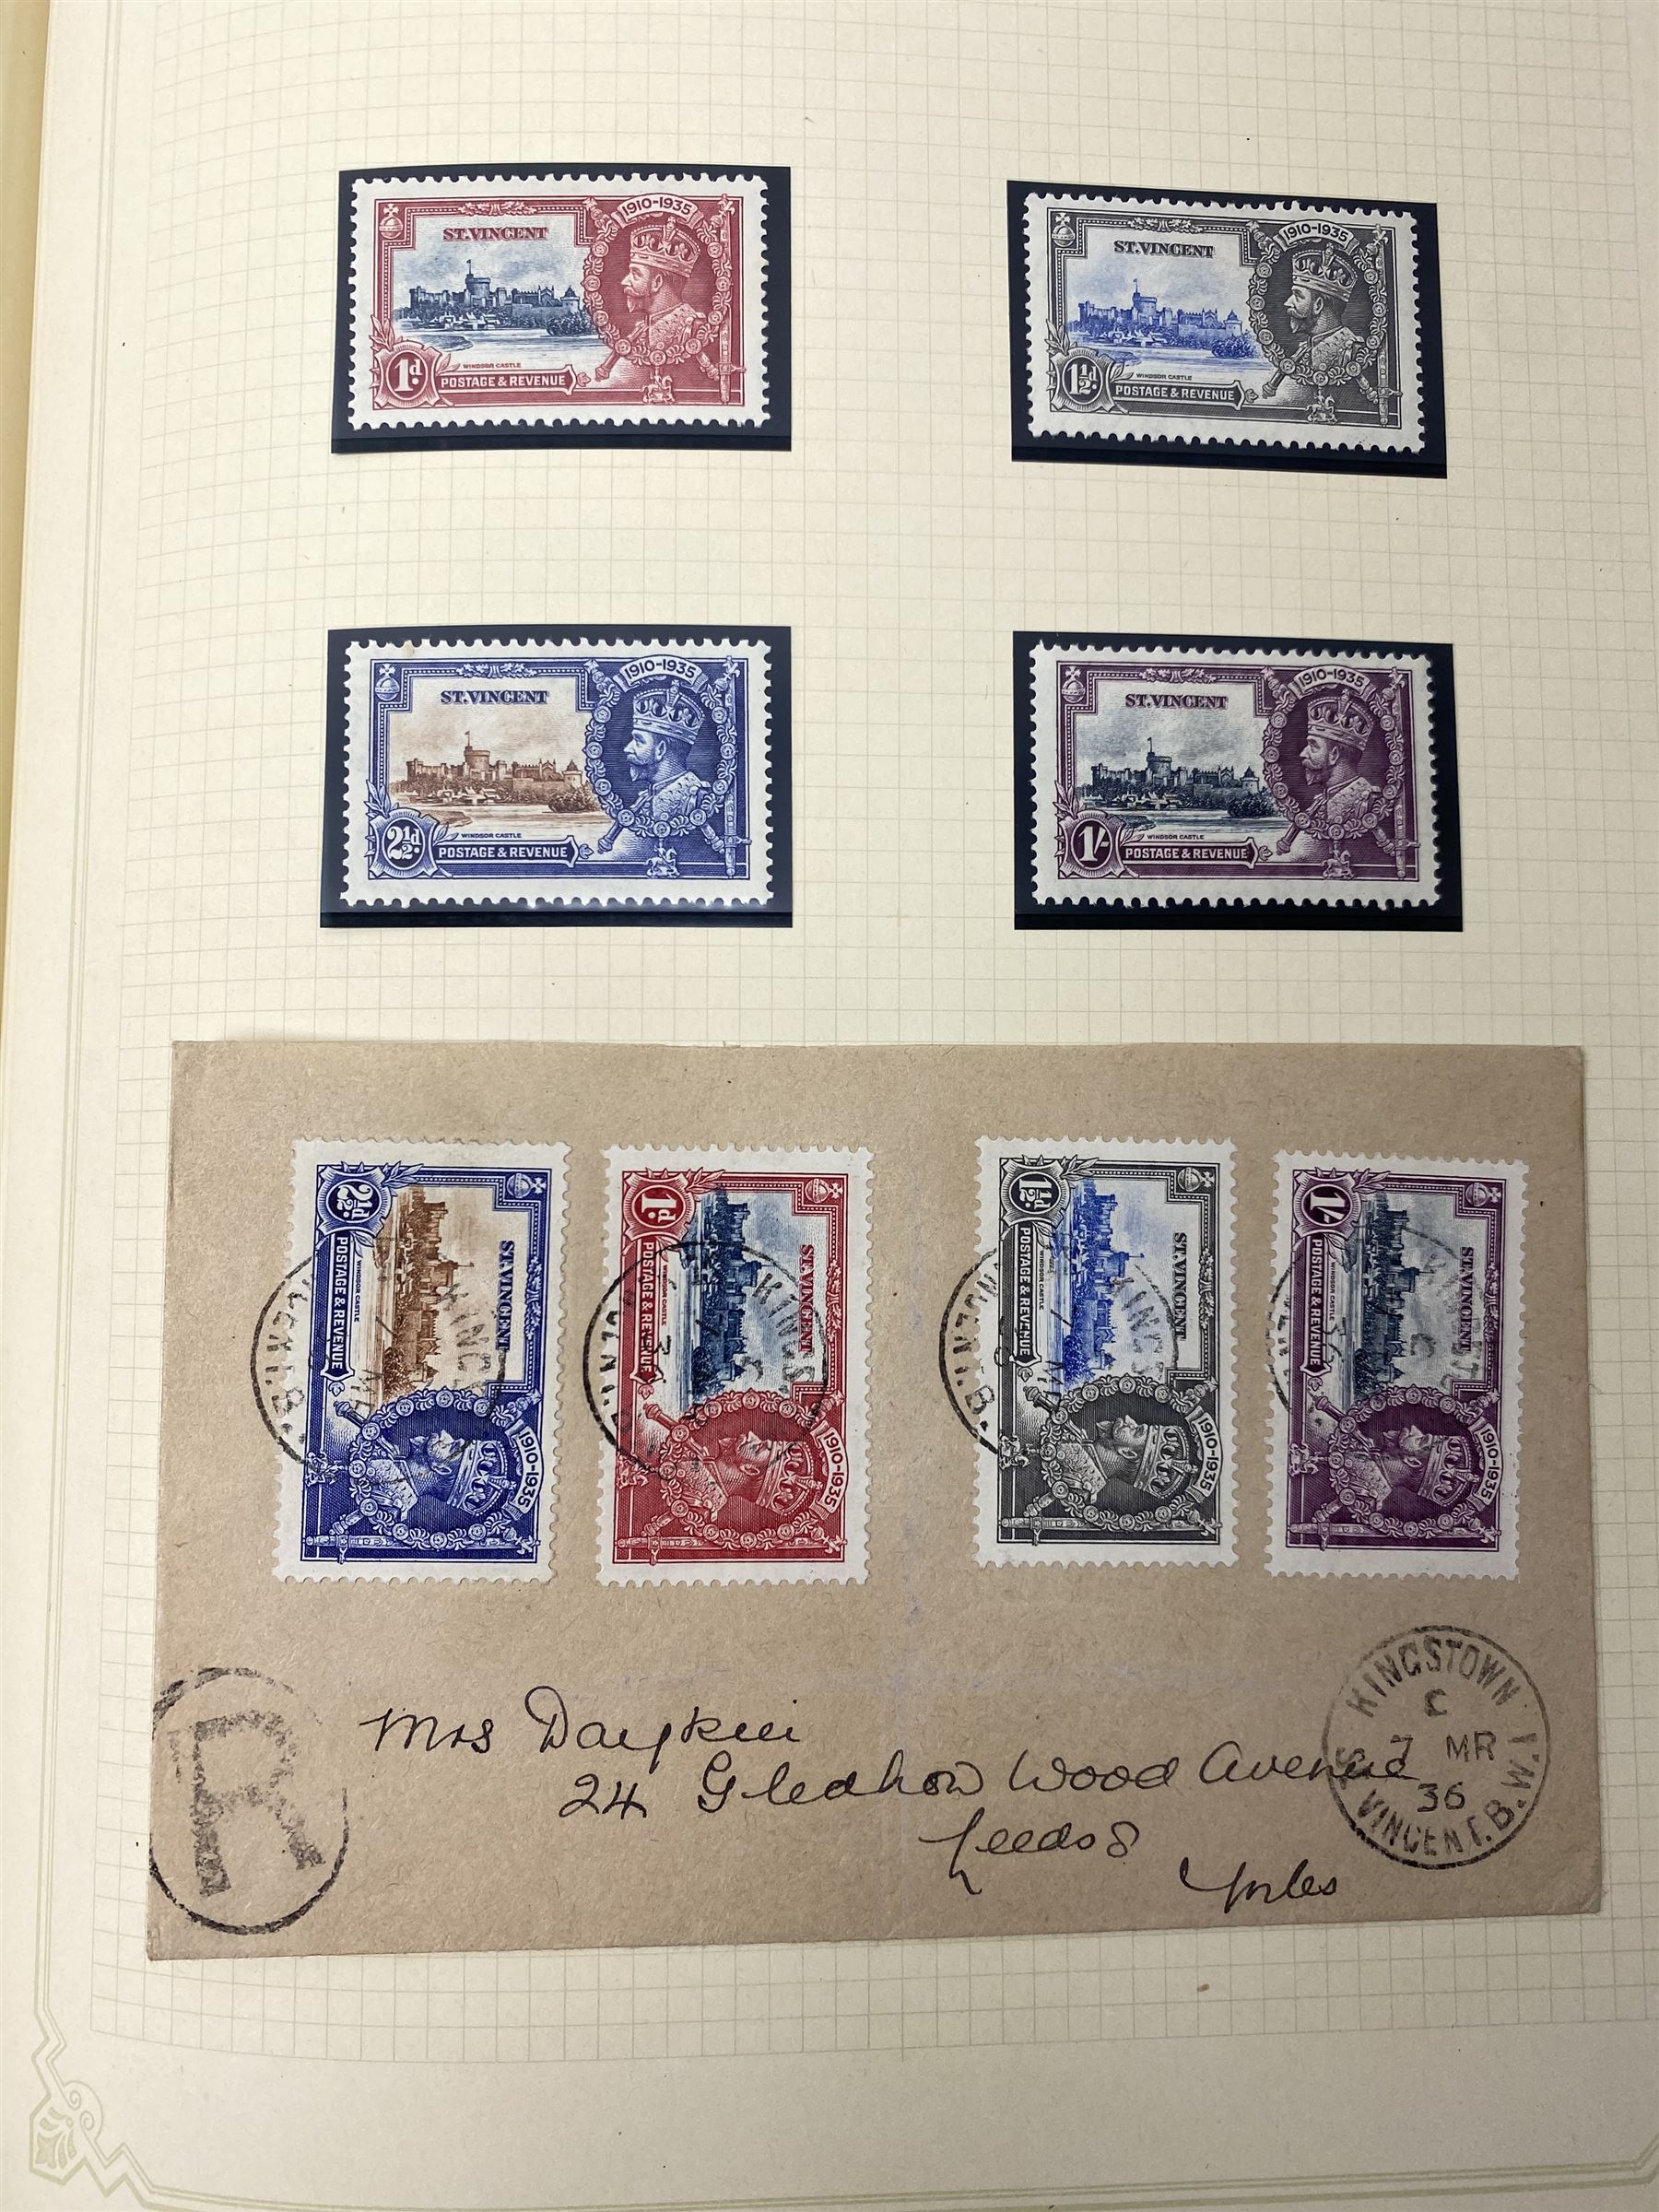 King George V 1935 Silver Jubilee stamps - Image 14 of 17